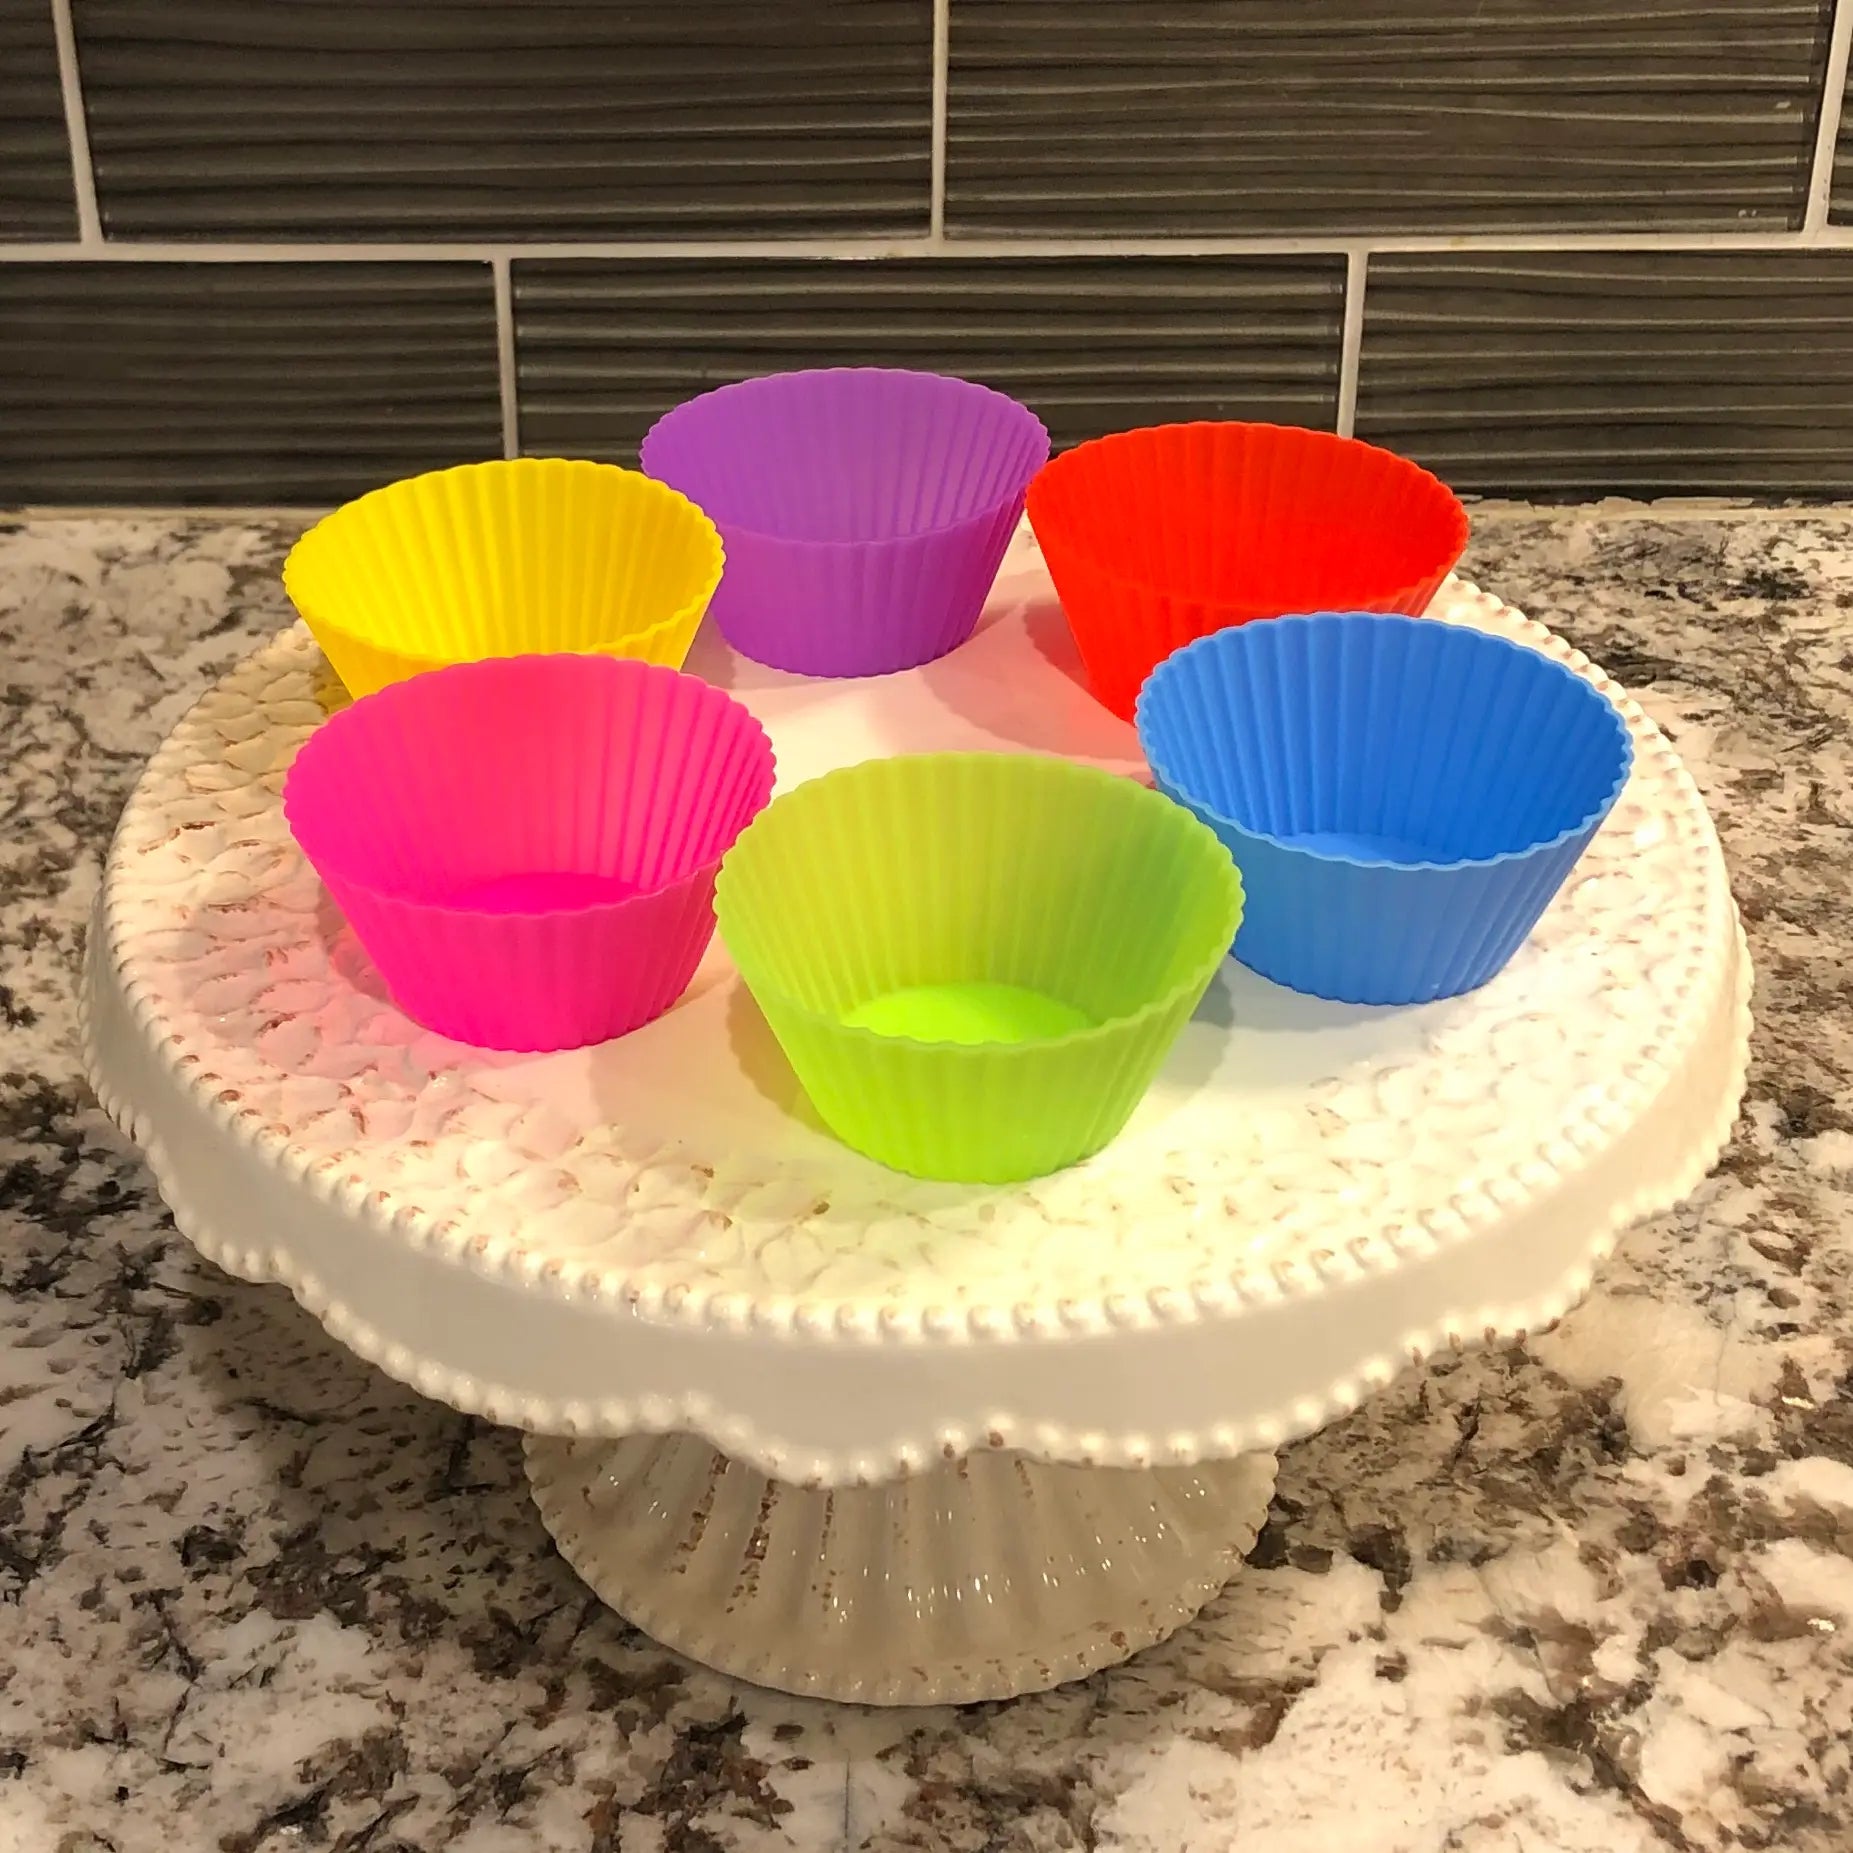 12 Packs, Reusable Silicone Muffin Cups and Cupcake Molds - Baking